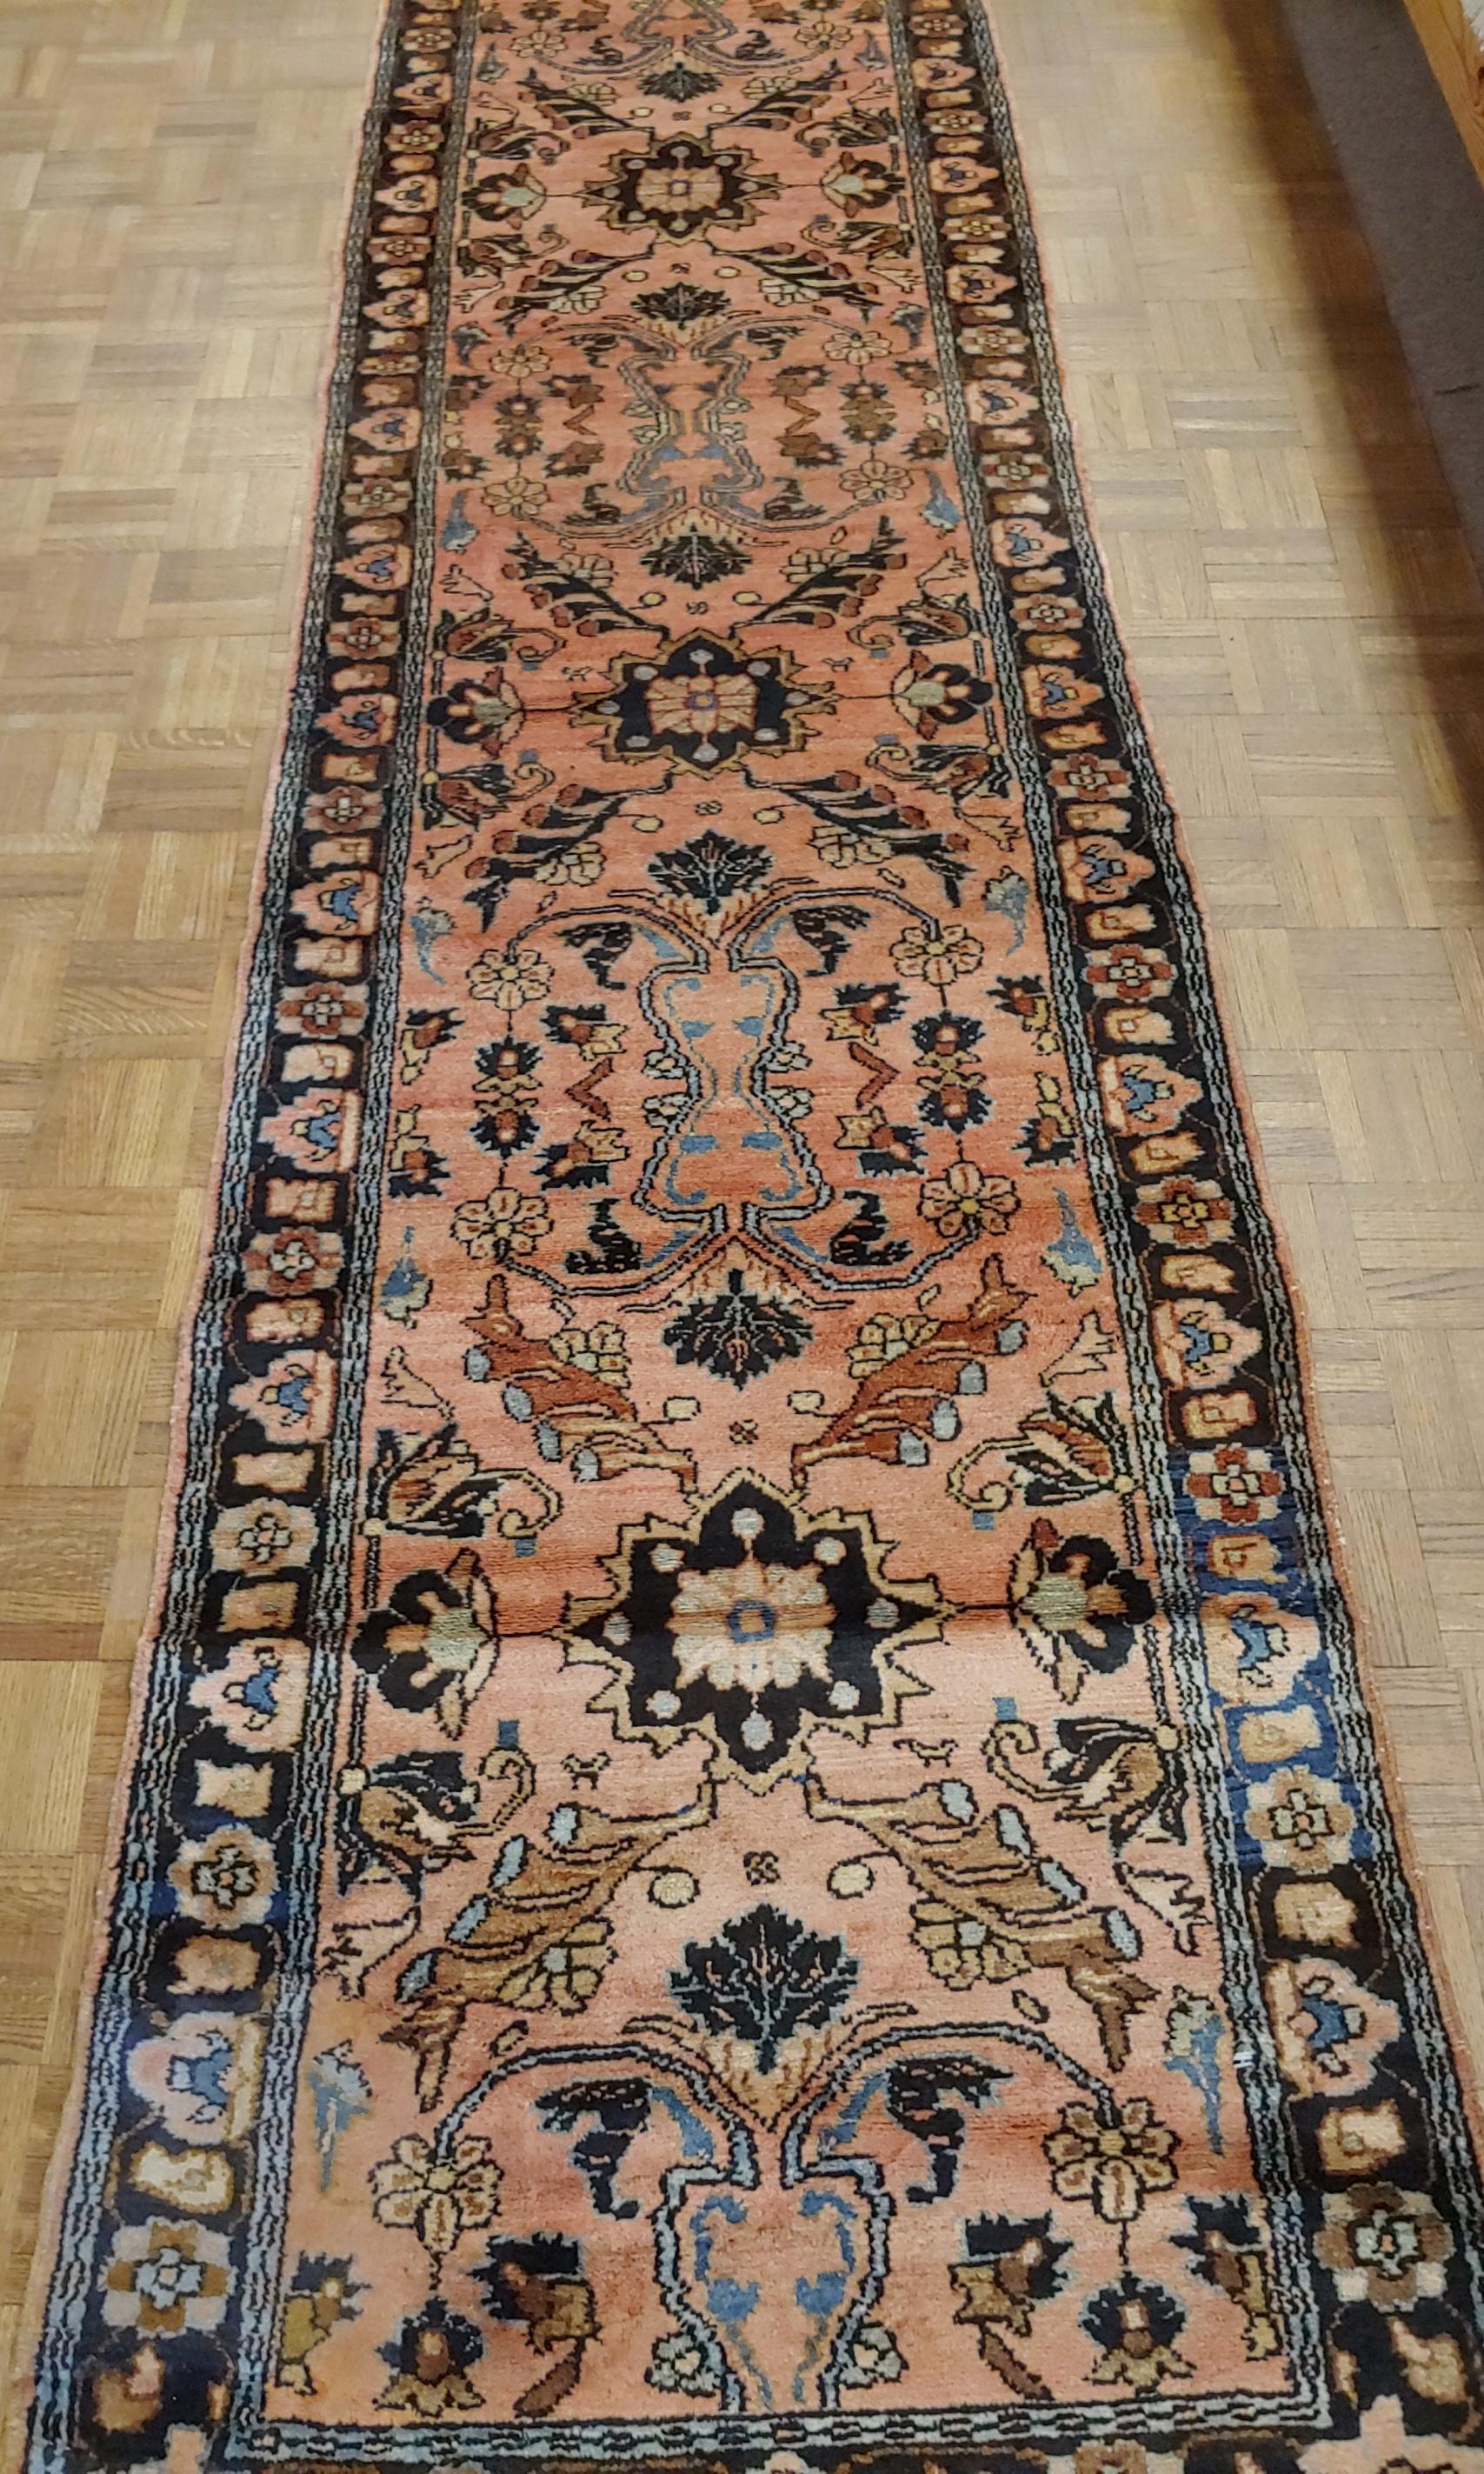 Azerbaijani Antique Persian Lilyhan Rug, Rust/Mauve Colored Field, 1915 runner 2-5x16=4 For Sale